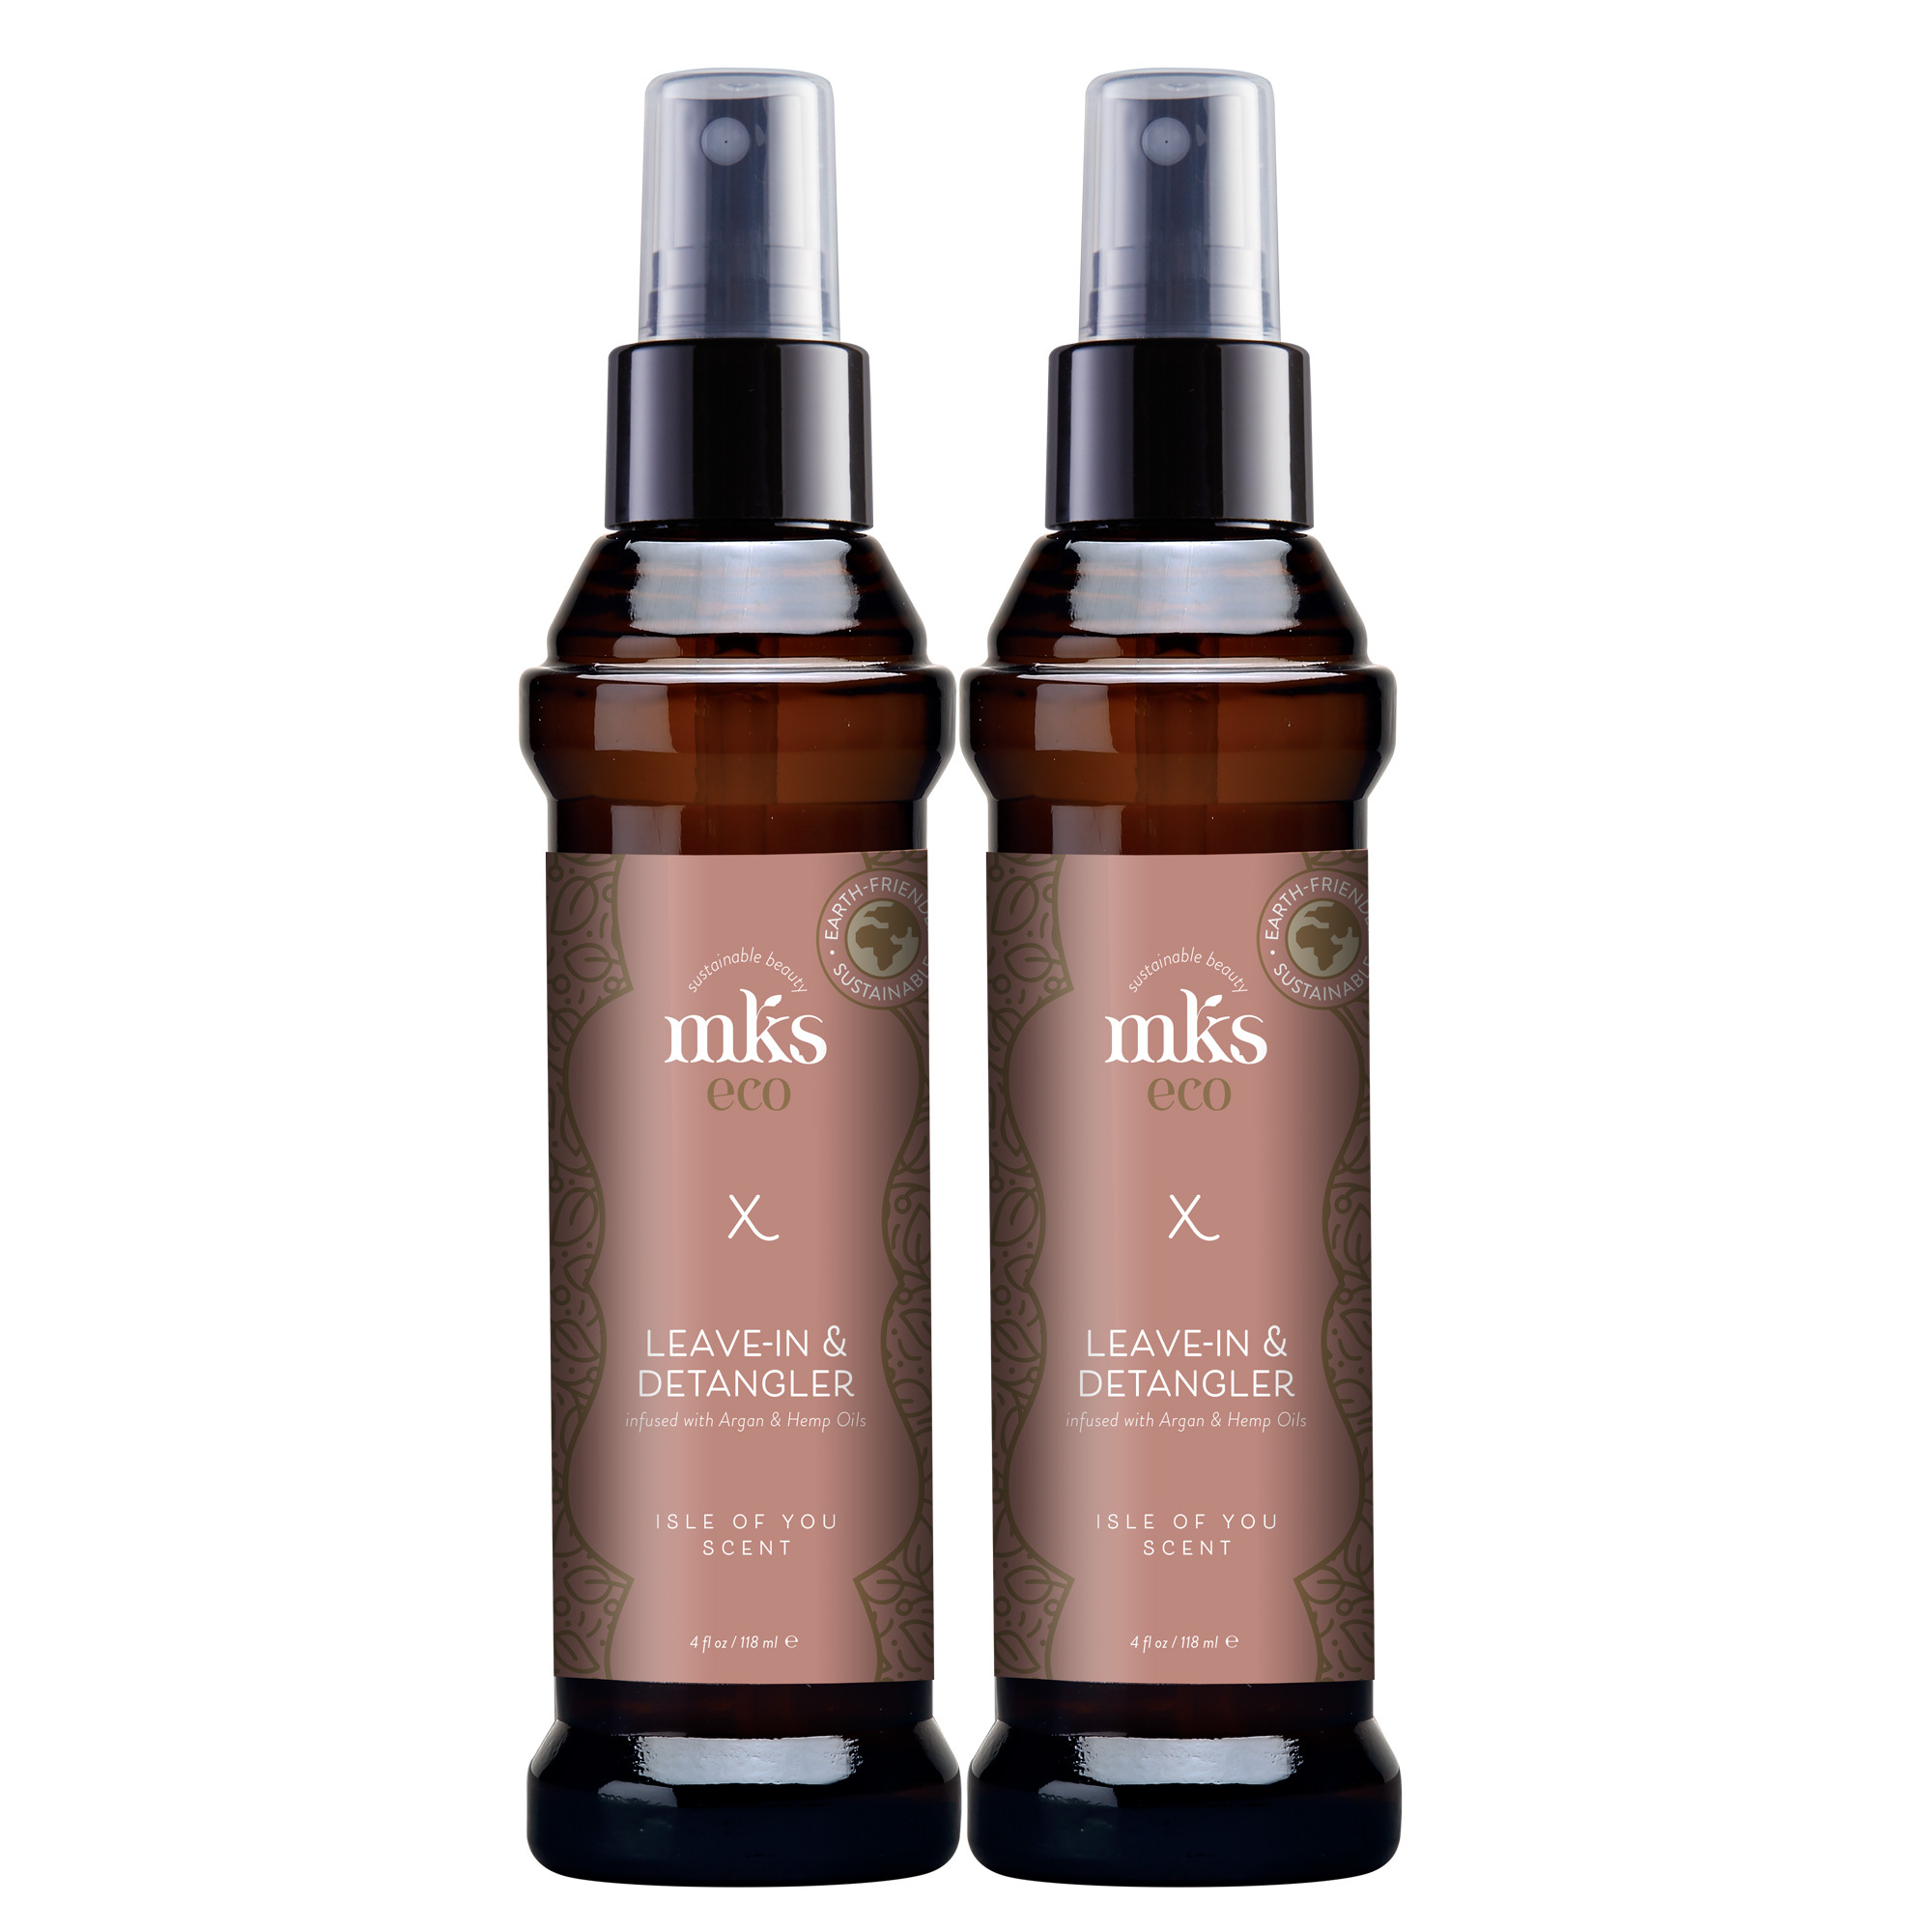 MKS eco DUOS: X Leave In & Detangler - Isle of You Scent